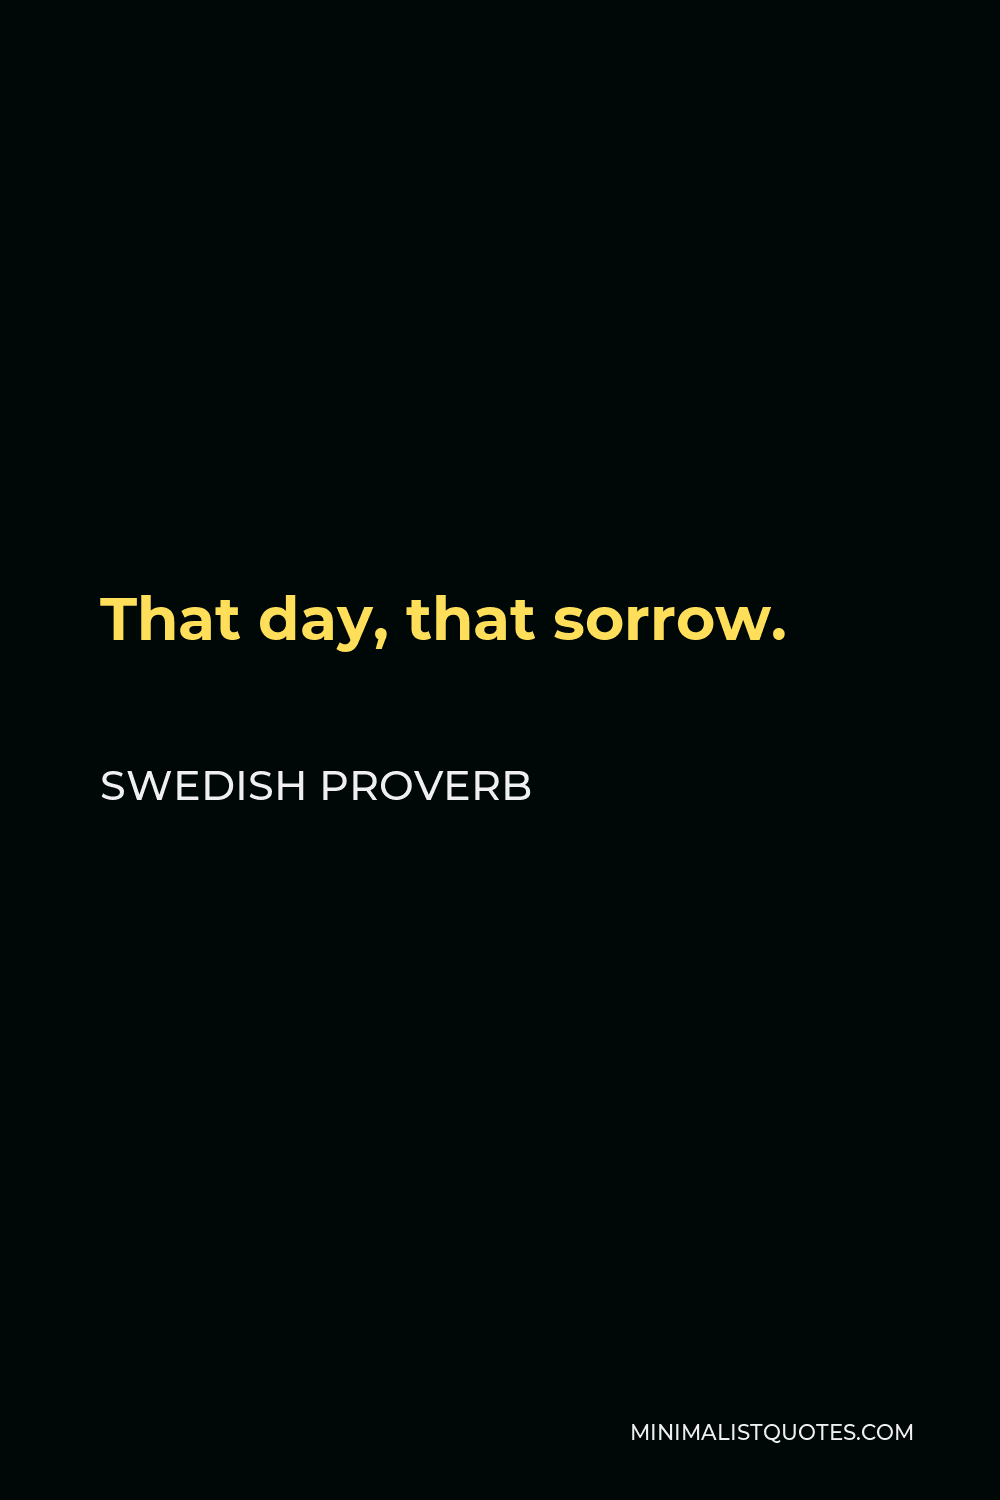 Swedish Proverb Quote - That day, that sorrow.